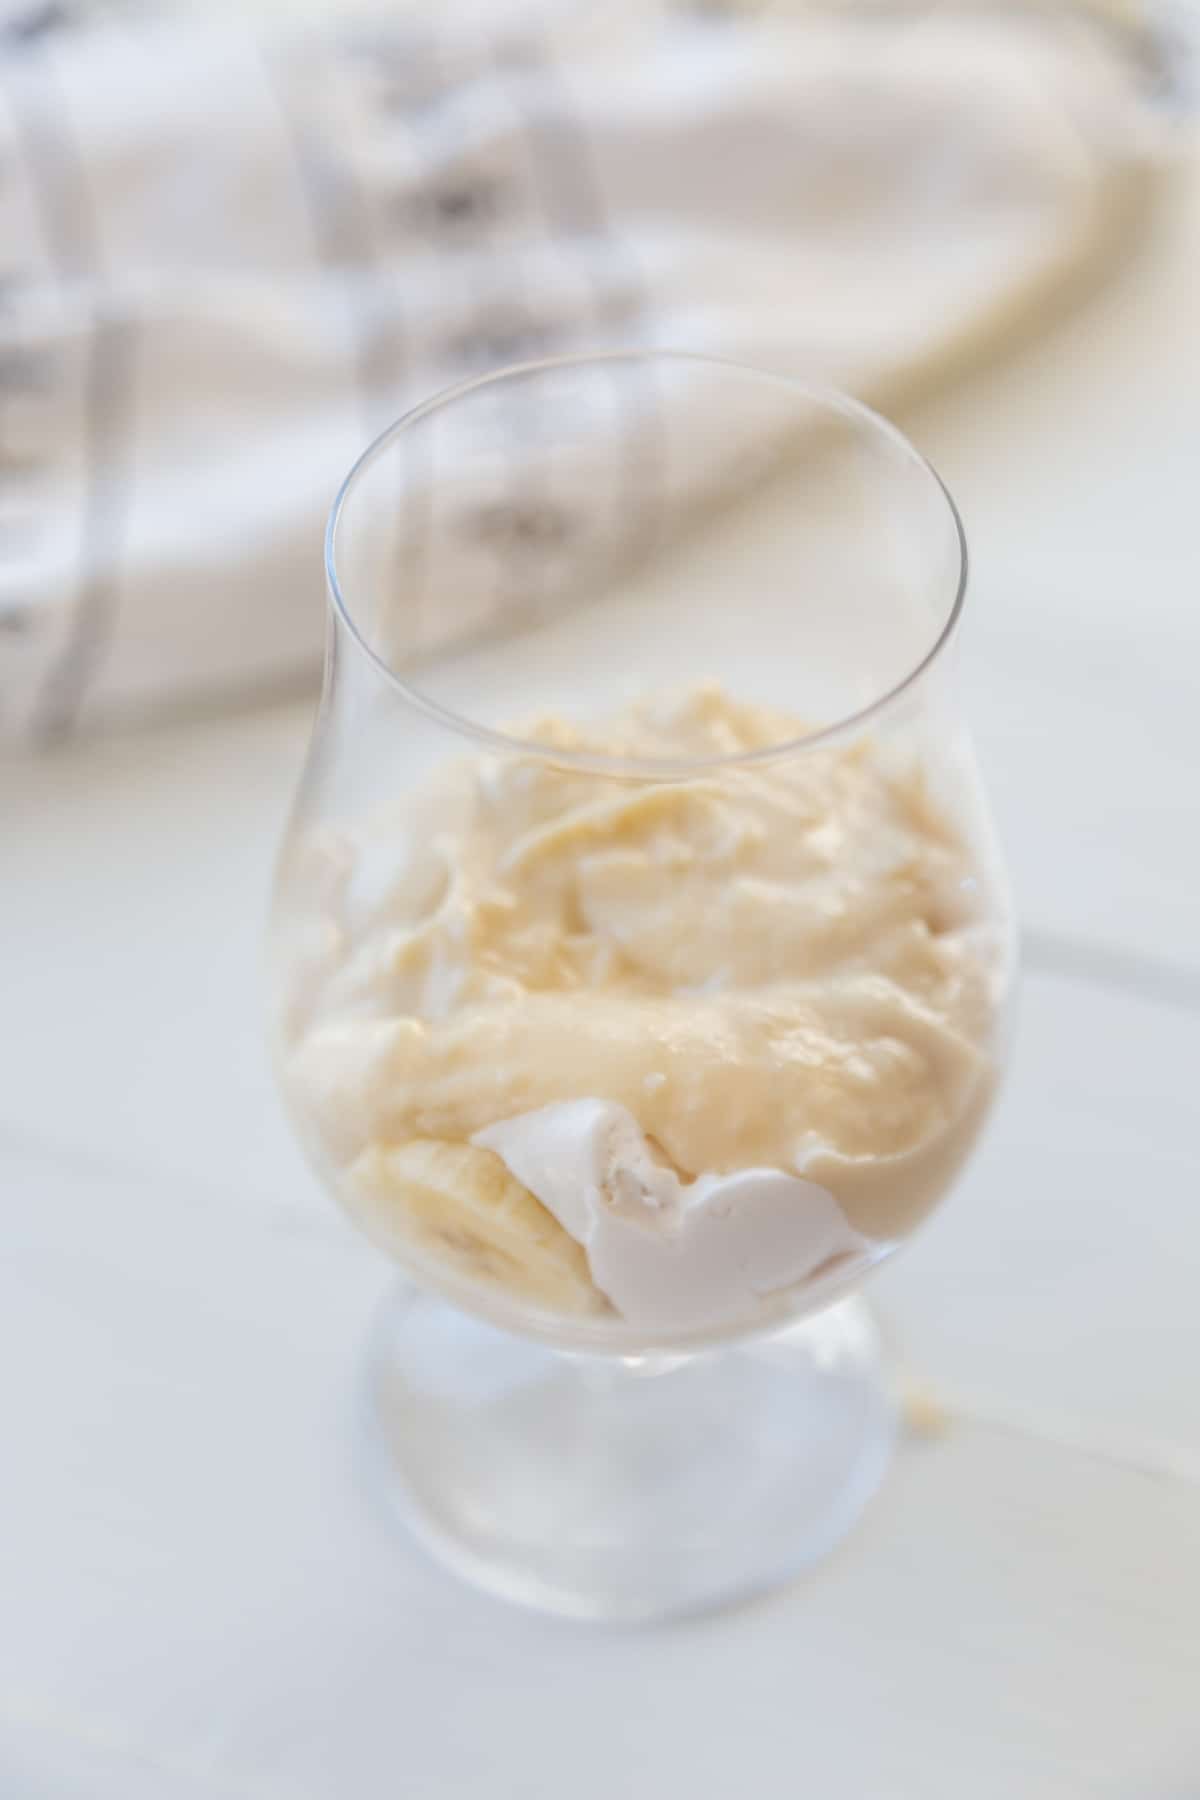 A glass with vanilla pudding and whipped cream.